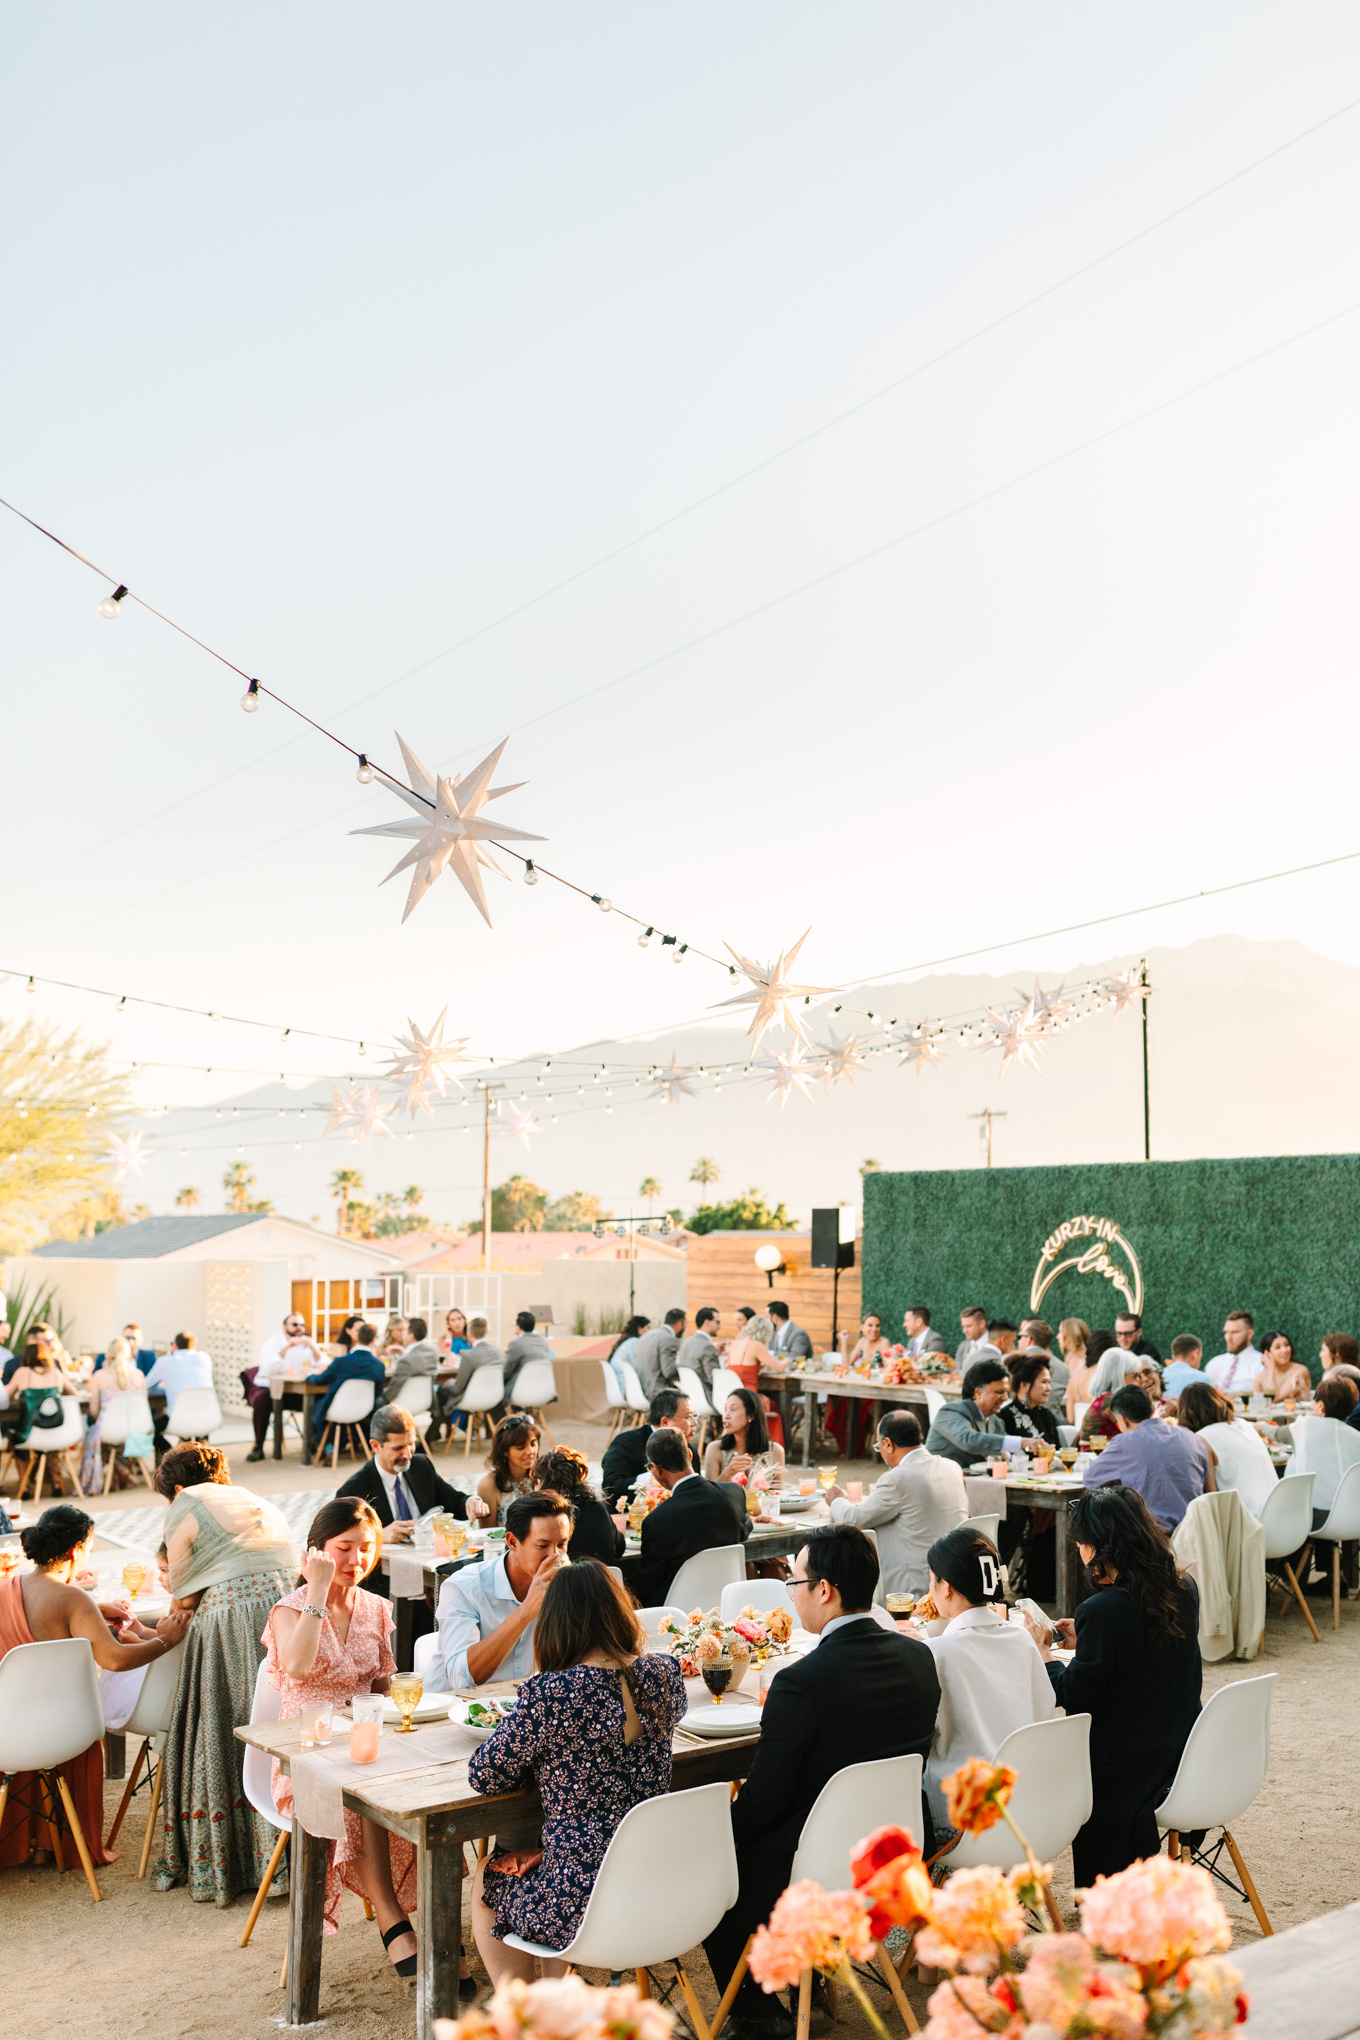 Wedding dinner | Pink and orange Lautner Compound wedding | Colorful Palm Springs wedding photography | #palmspringsphotographer #palmspringswedding #lautnercompound #southerncaliforniawedding  Source: Mary Costa Photography | Los Angeles